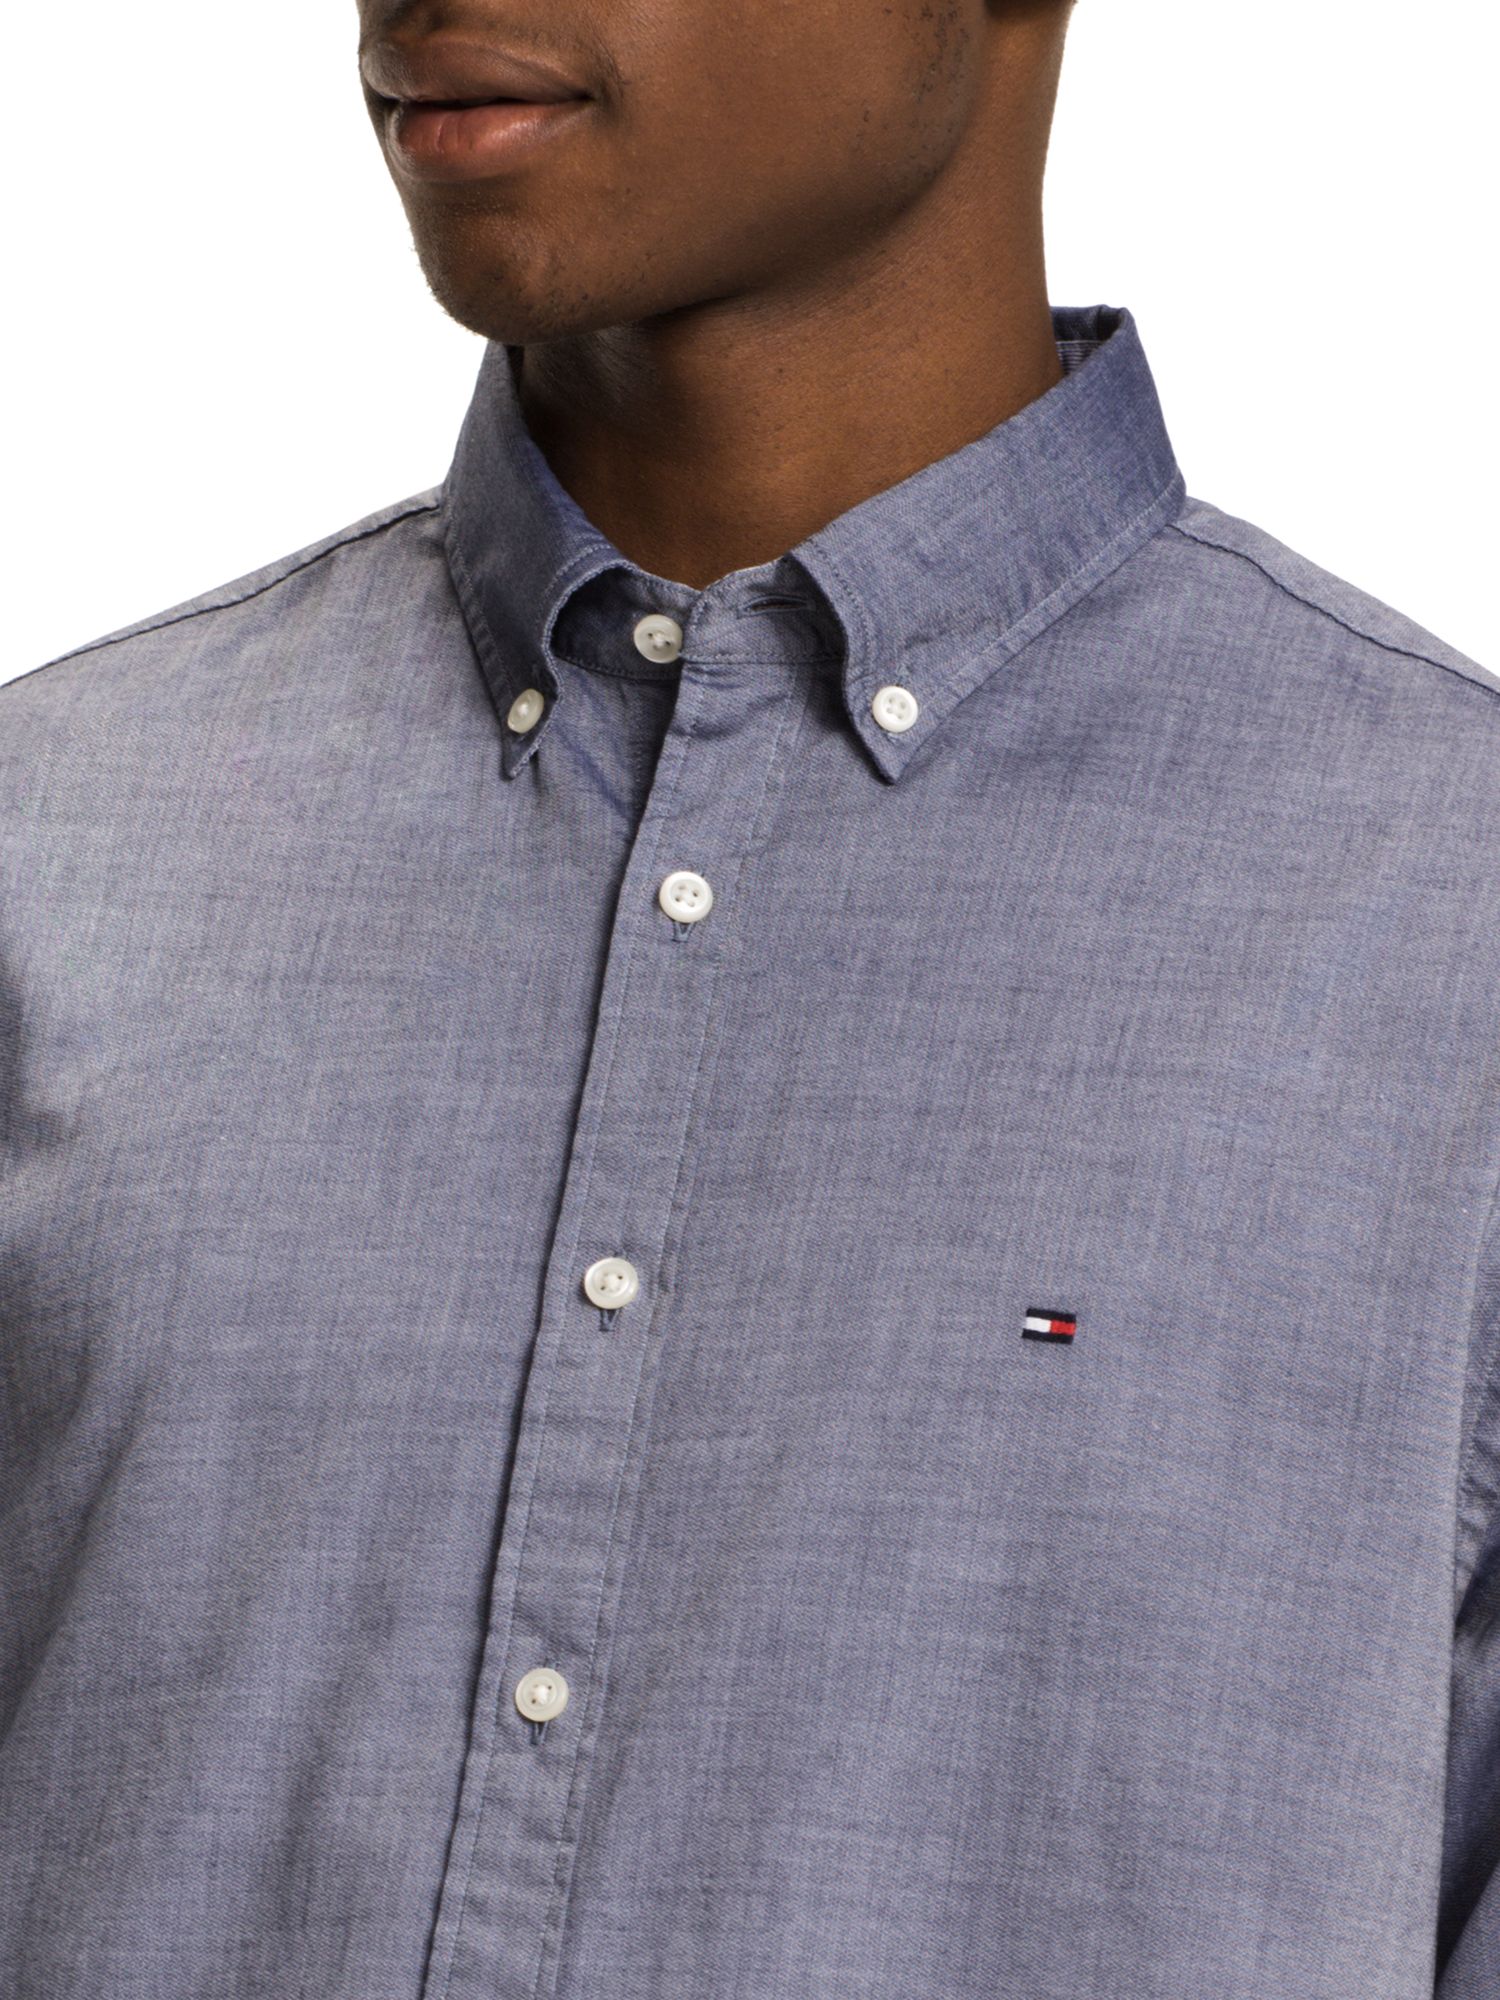 Tommy Hilfiger Two Tone Dobby Shirt at 